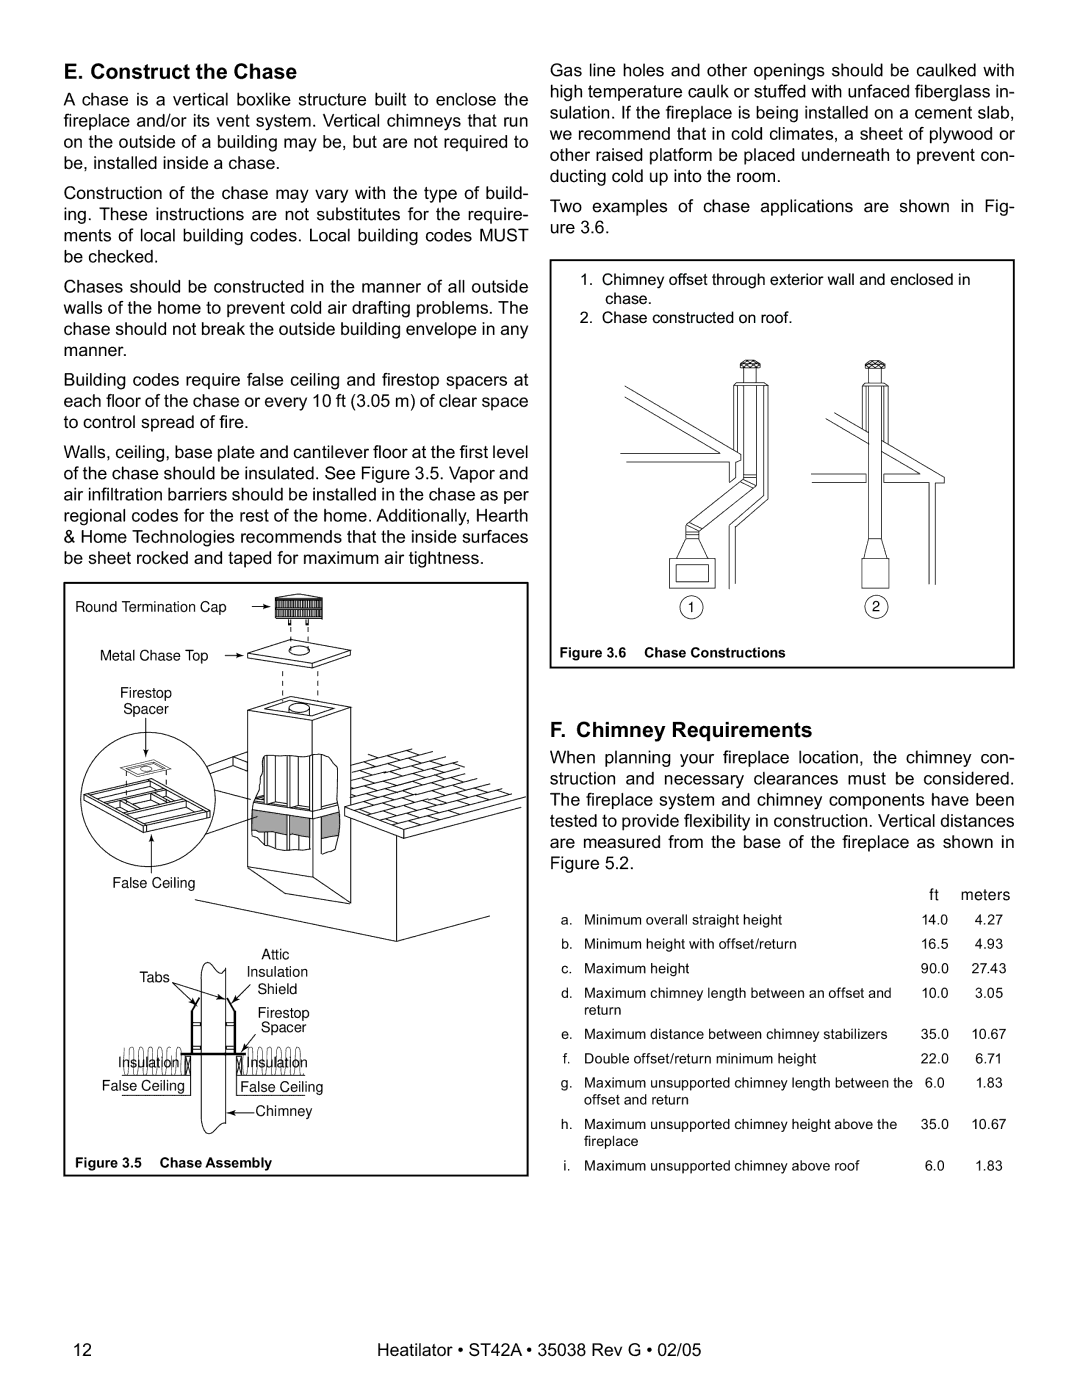 Hearth and Home Technologies ST42A owner manual Construct the Chase, Chimney Requirements 